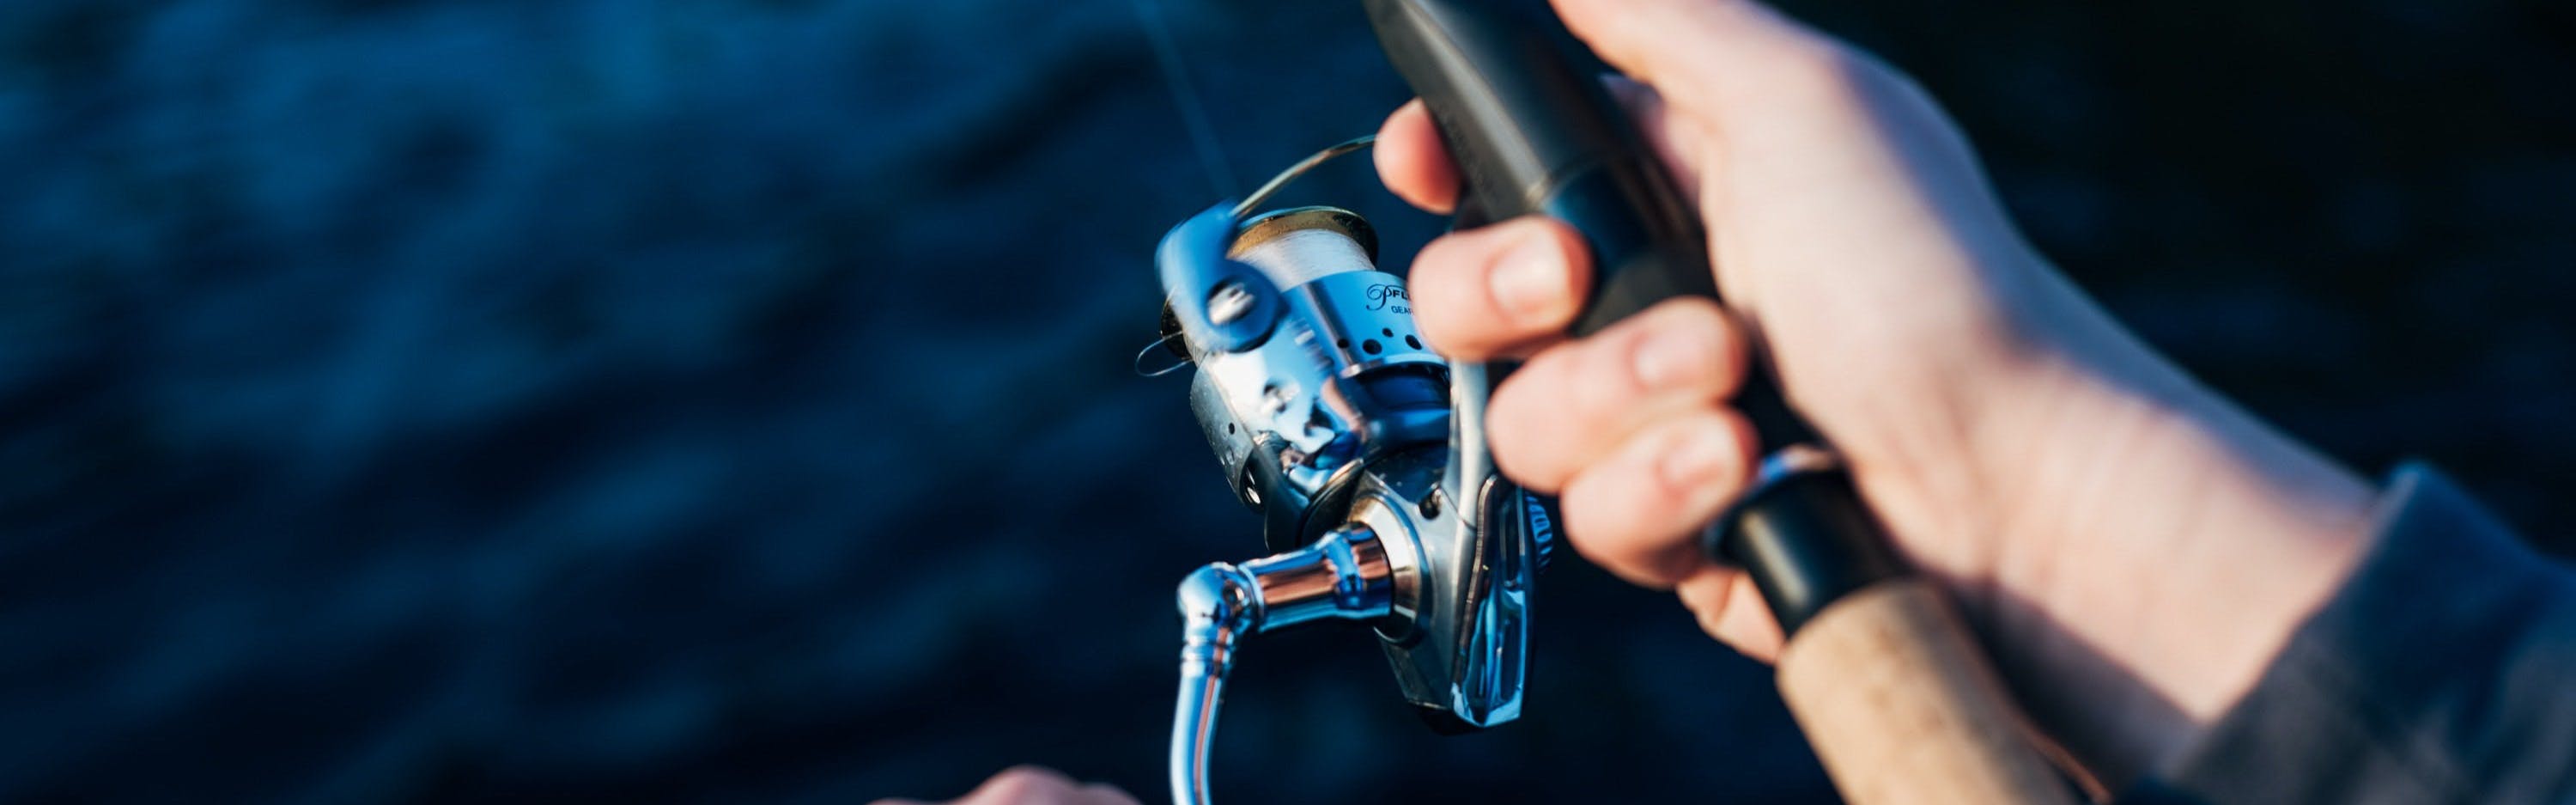 The Most Exciting New Gear from Pure Fishing for 2022